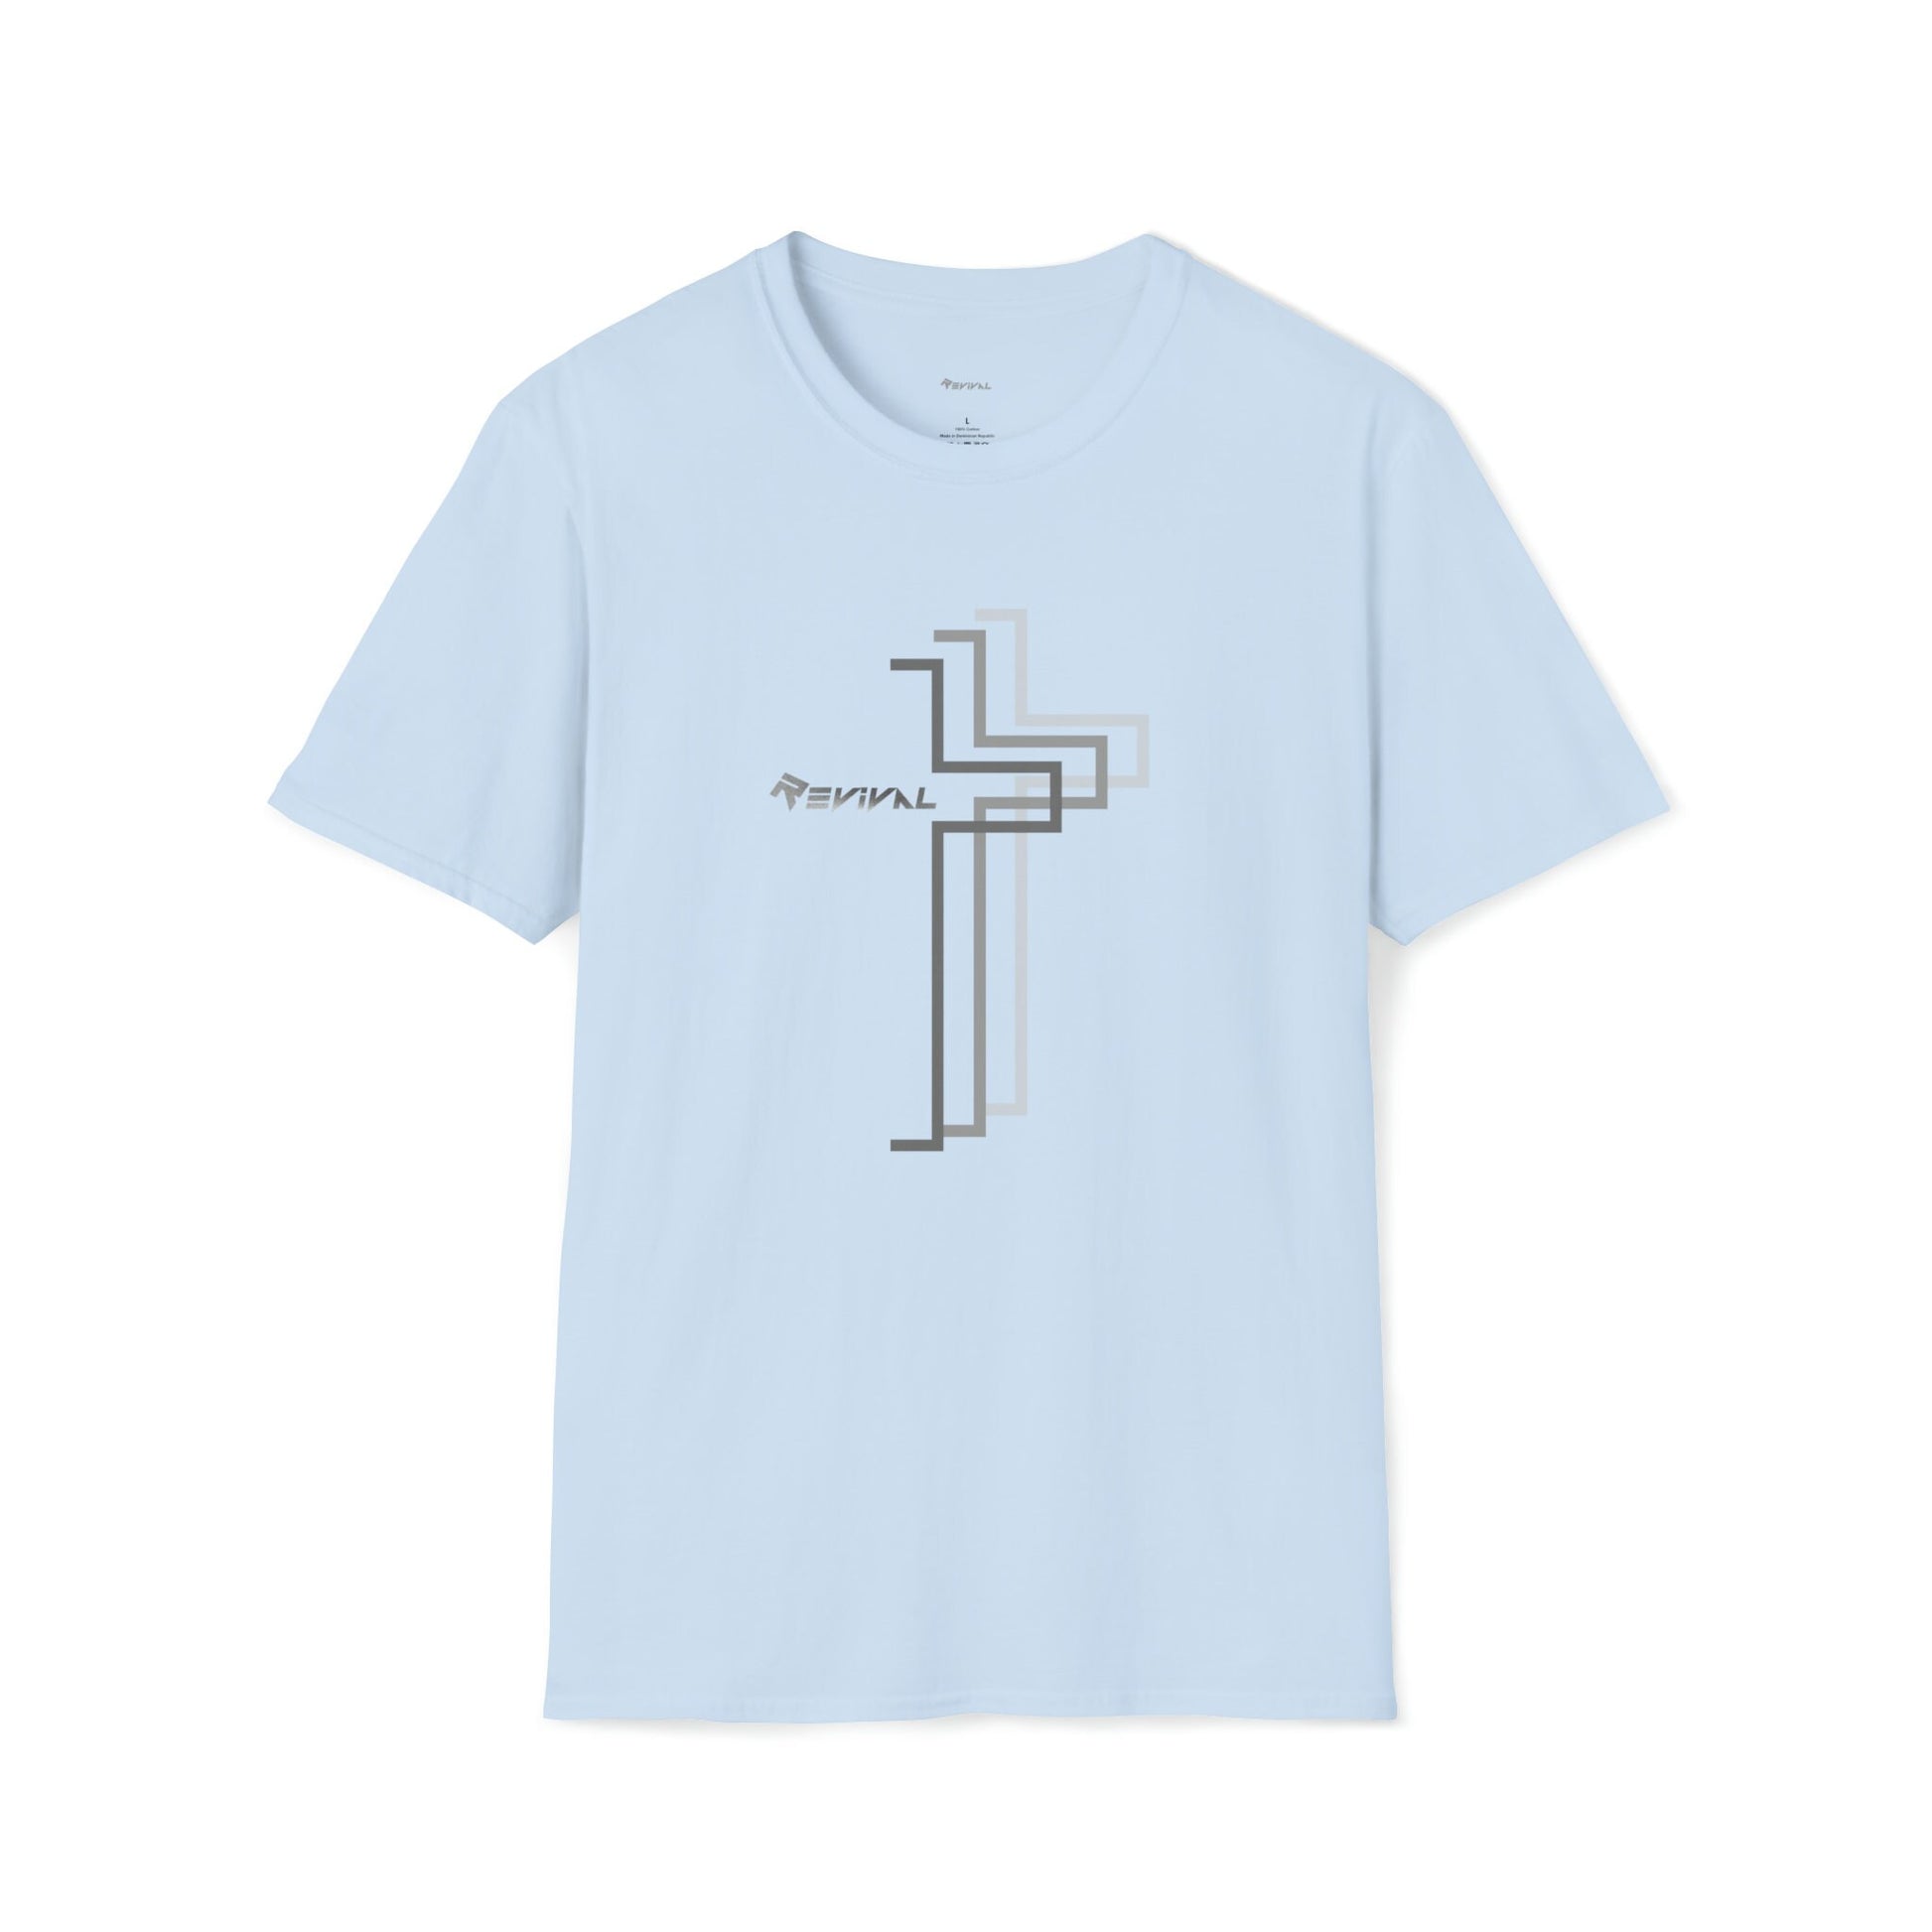 Grey Calvary Intersection by Revival Short sleeve T-Shirt, Comfortable, soft Tee, Gift for Men and Women